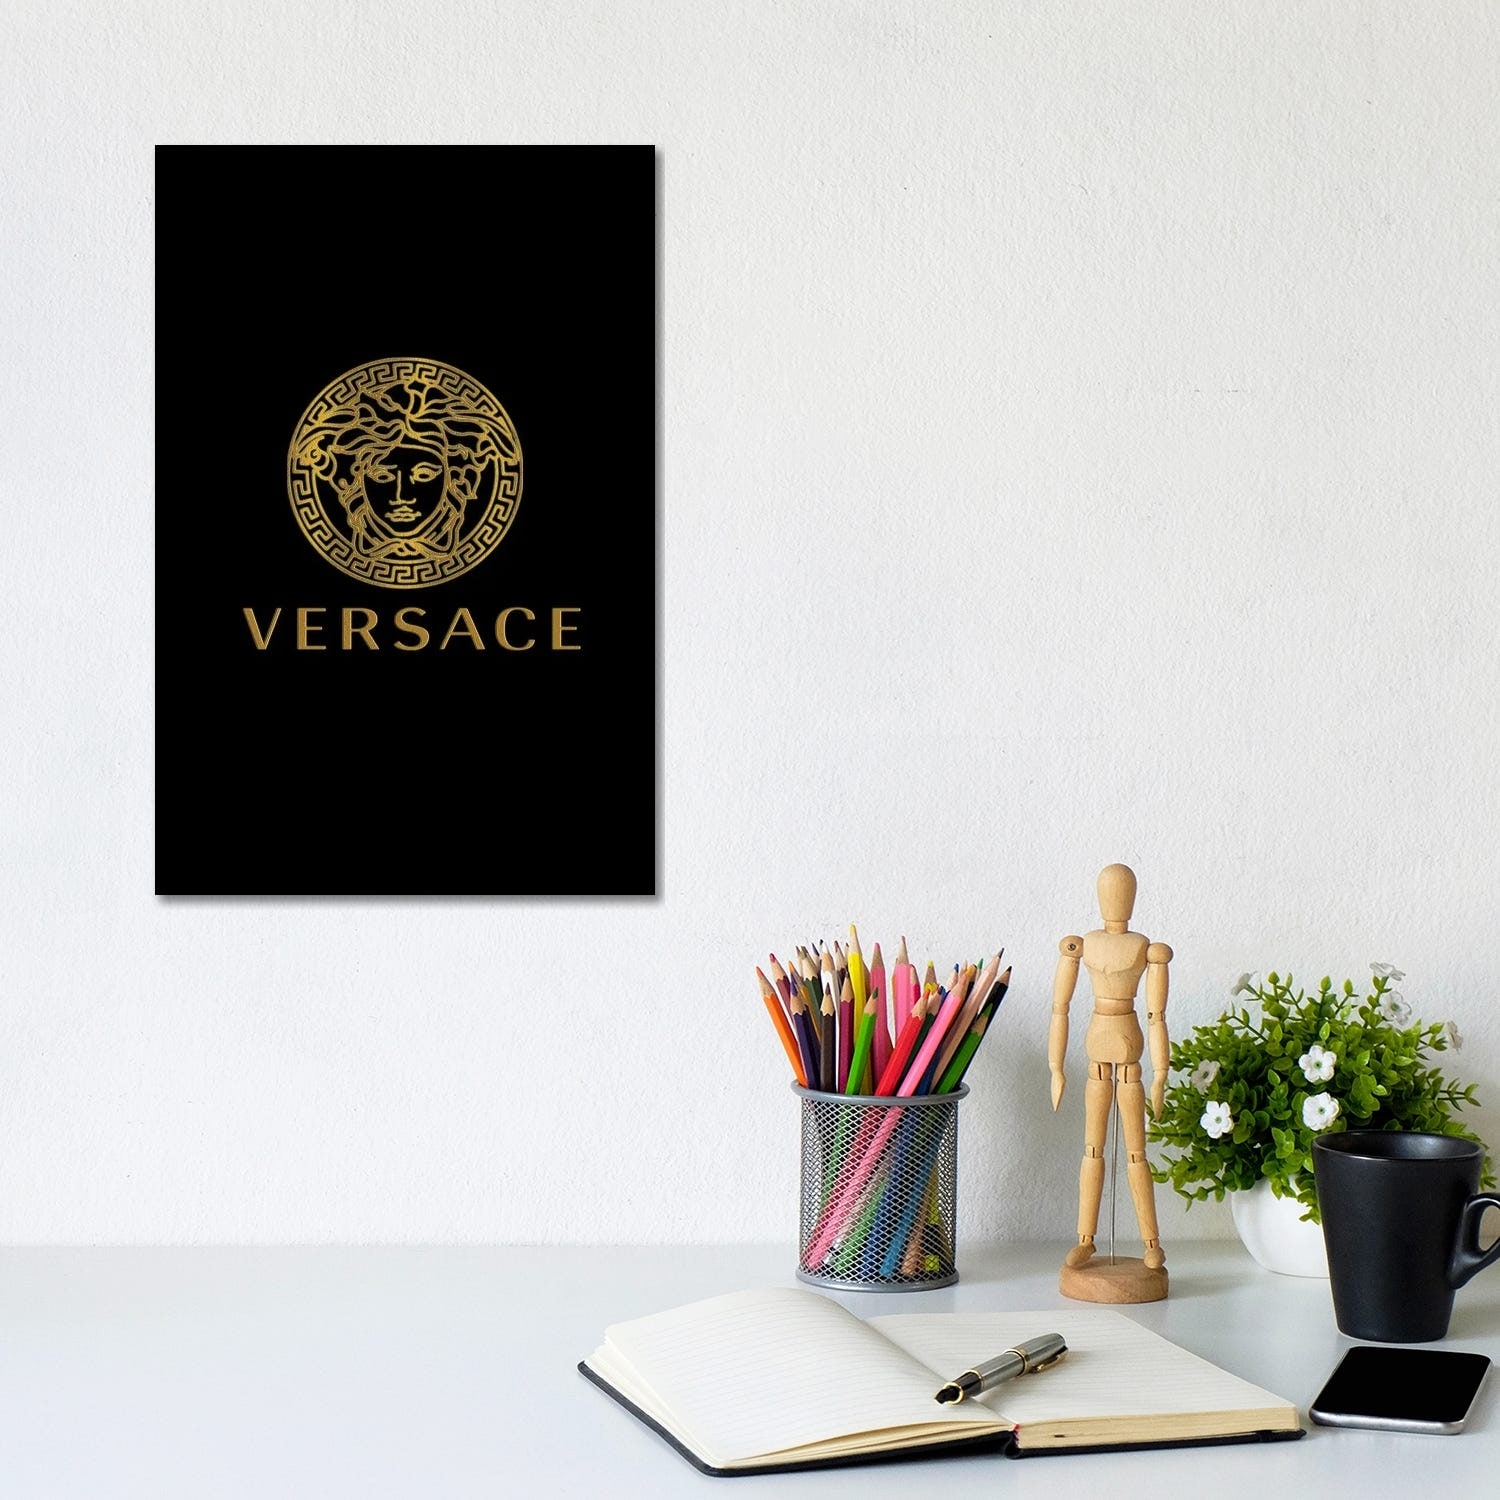 Paul Rommer Canvas Wall Decor Prints - Versace ( Fashion > Fashion Brands > Versace art) - 40x26 in